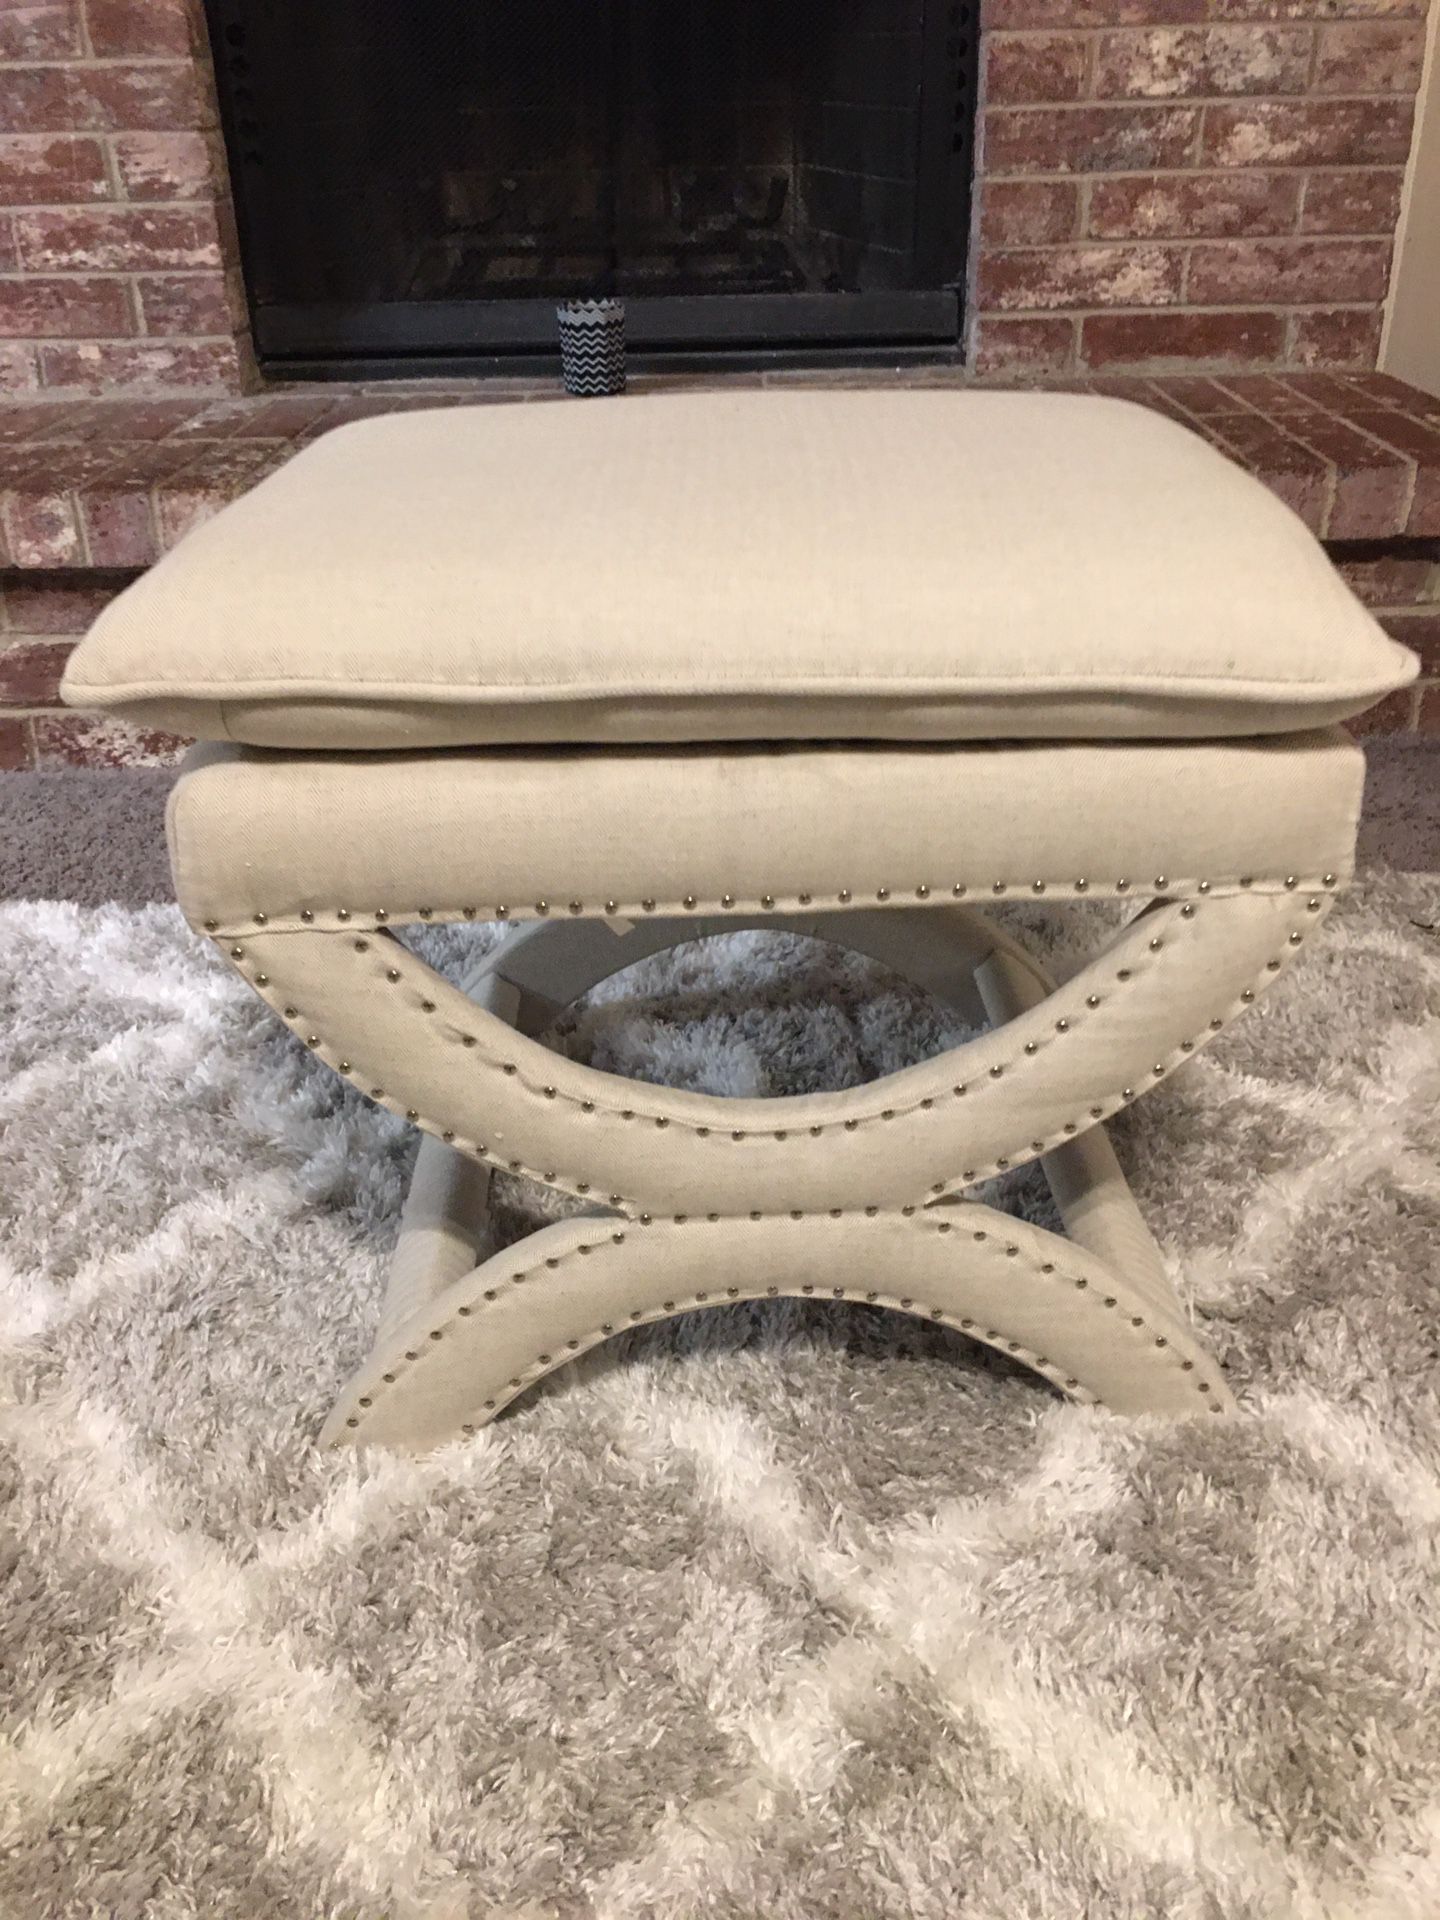 BRAND NEW OUT OF THE BOX, NEVER USED Accent Stool ((READ DESCRIPTION BELOW))